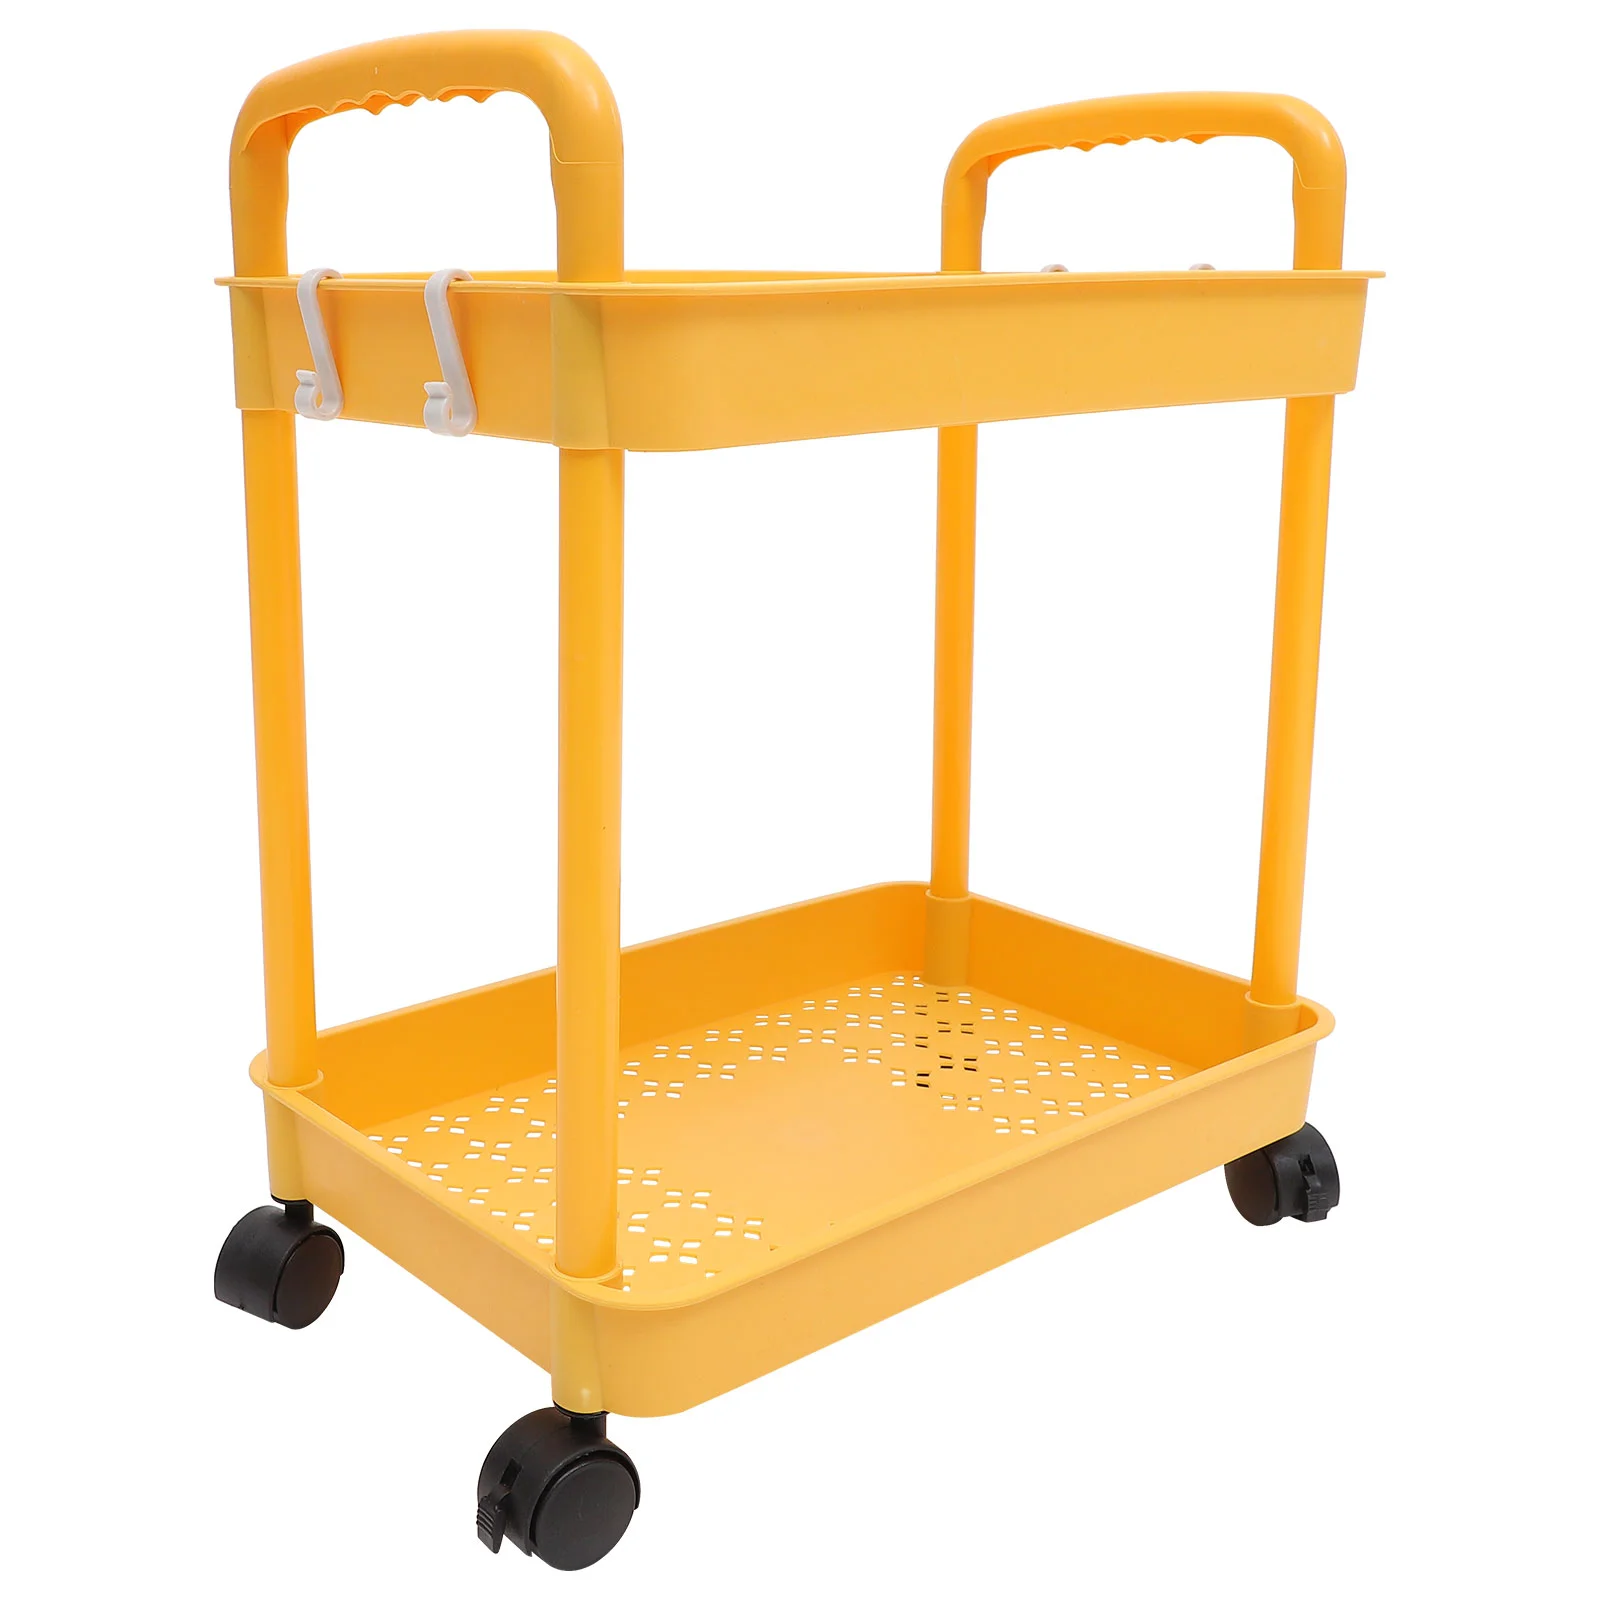 

Mobile Double Layer Cart Storage Rack Bathroom Small with Wheels Rolling Book Shelves Utility on Diaper Laundry